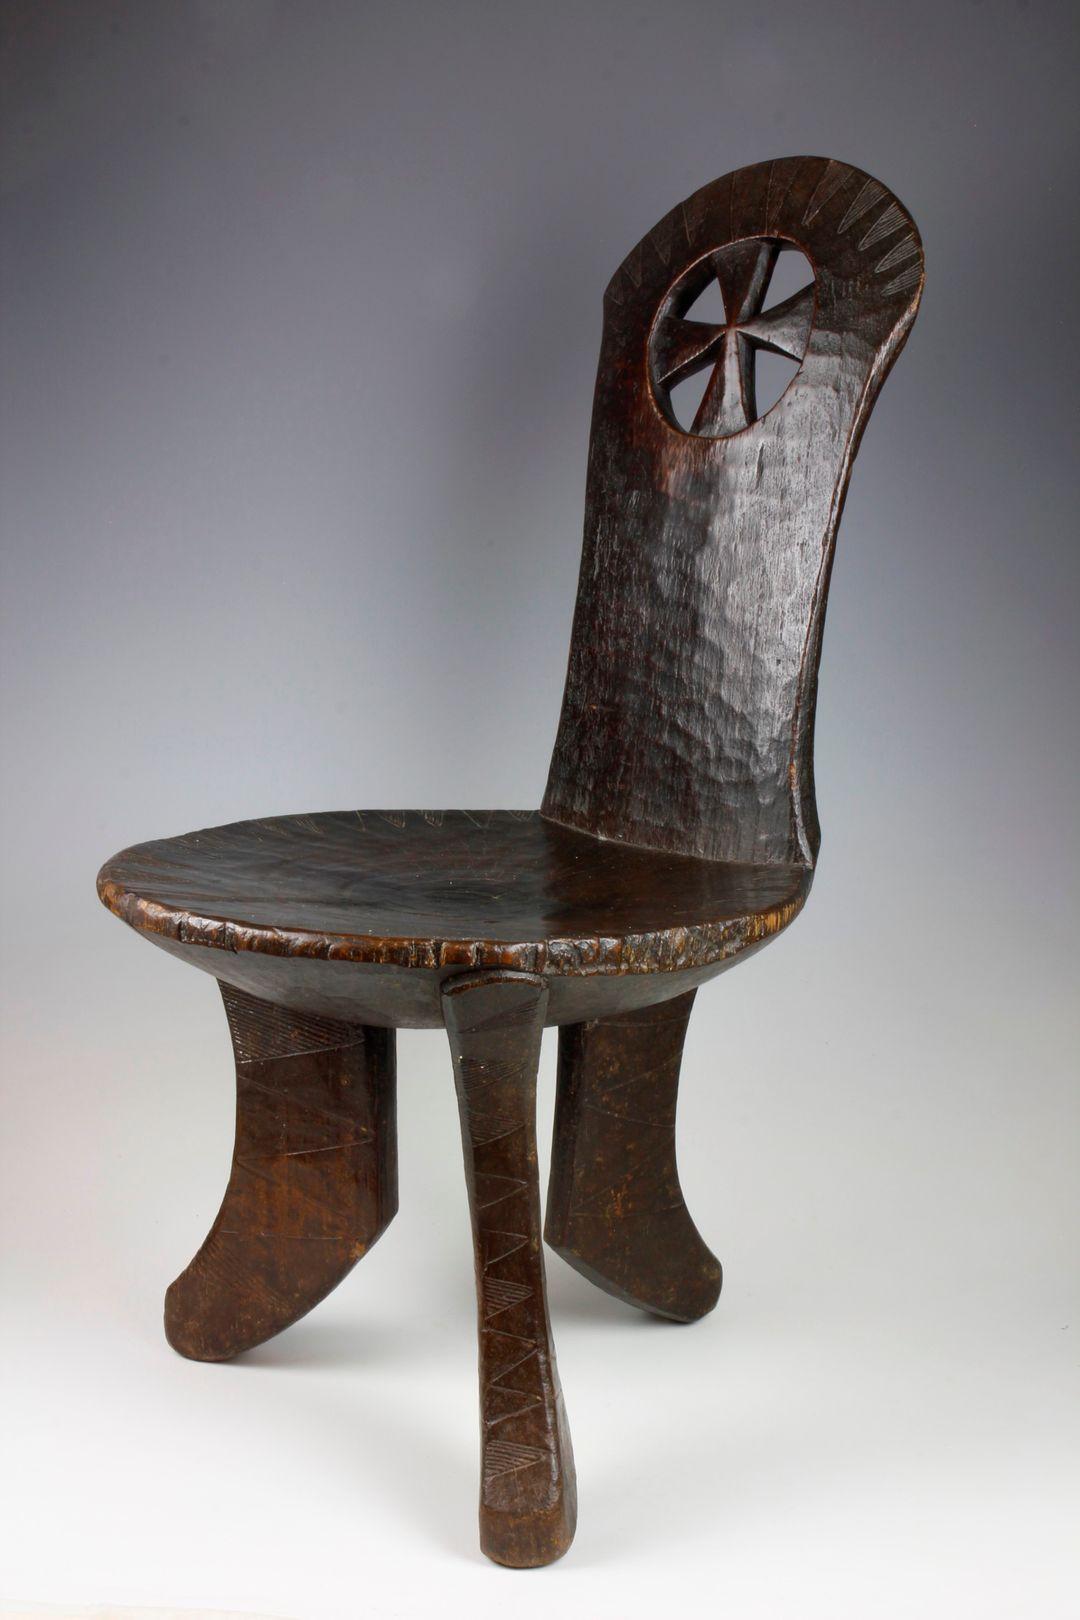 This finely carved, medium-sized chair from the Jinka culture in Ethiopia features an upright back-support with an unusual and attractive cut-out cross decoration. 

A series of downward pointing triangular designs filled with striations are located